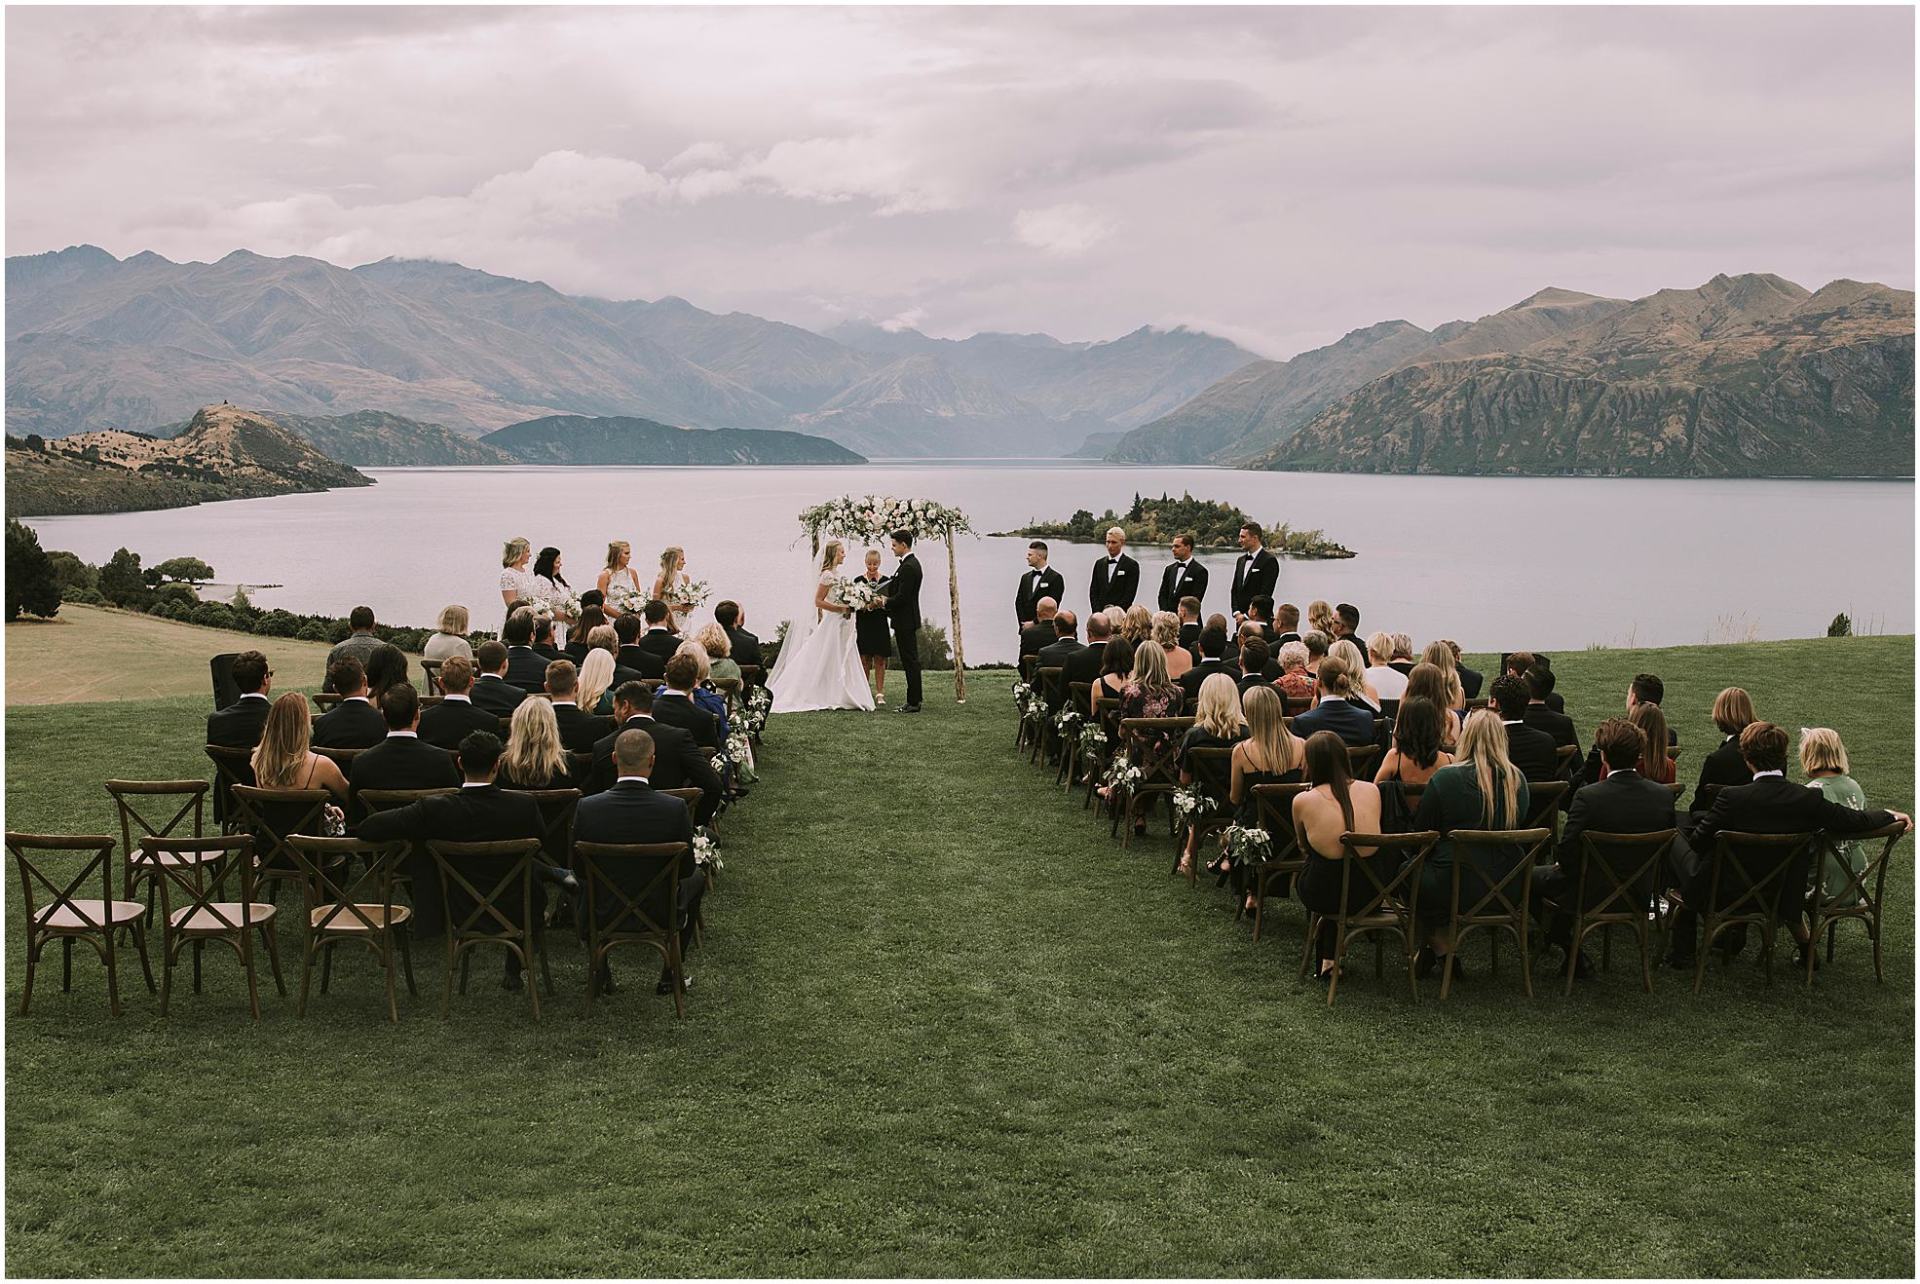 Charlotte Kiri Photography - Wedding Photography of a bride and groom exchanging vows in front of a floral alter with a spectacular backdrop of lakes and mountains behind them at Rippon, in Wanaka, New Zealand.